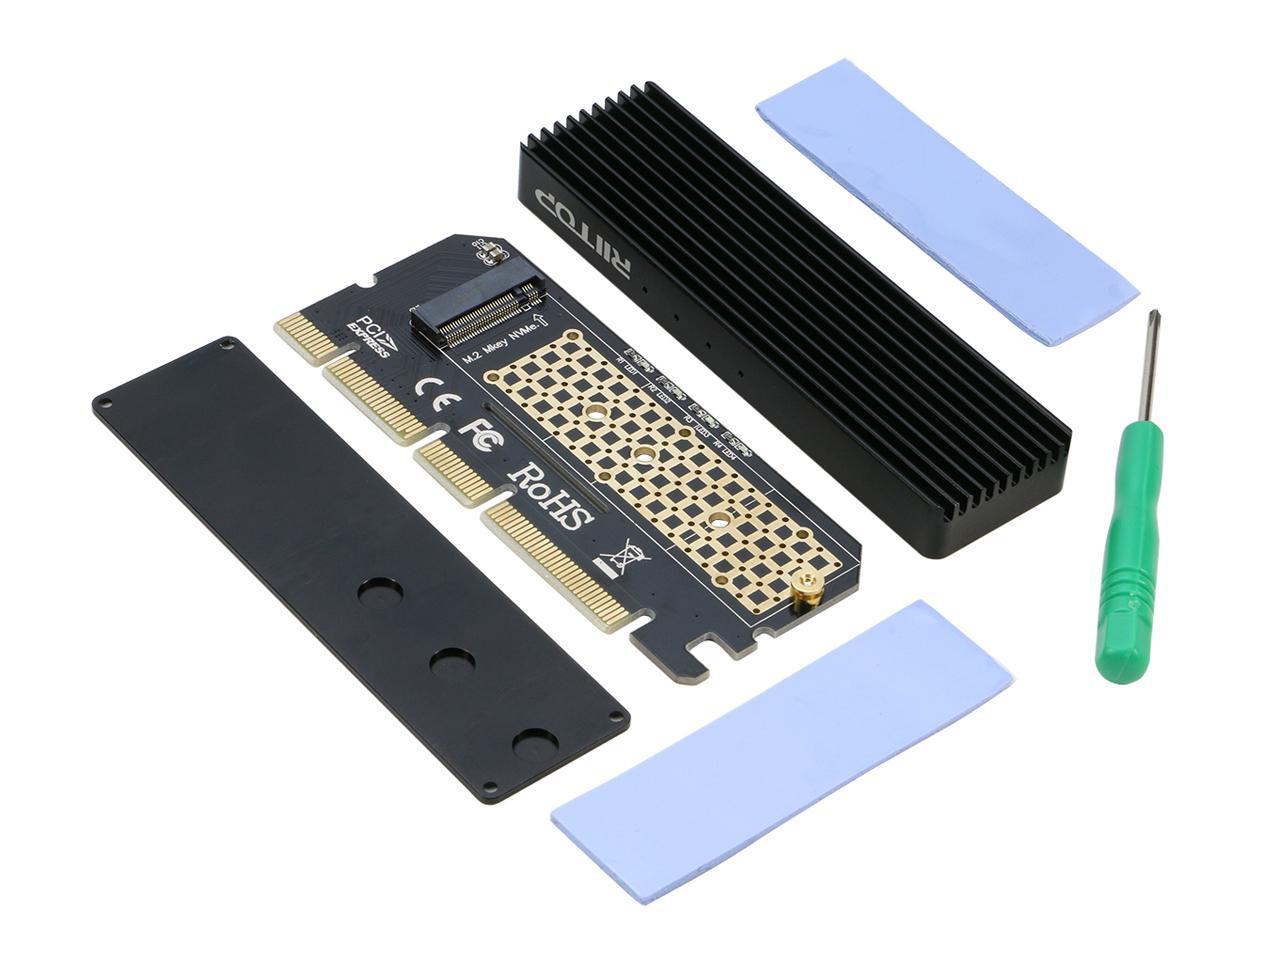 Riitop Nvme Adapter M2 Pcie Ssd To Pci E X4x8x16 Converter Card With Heat Sink For M2 M Key 0242